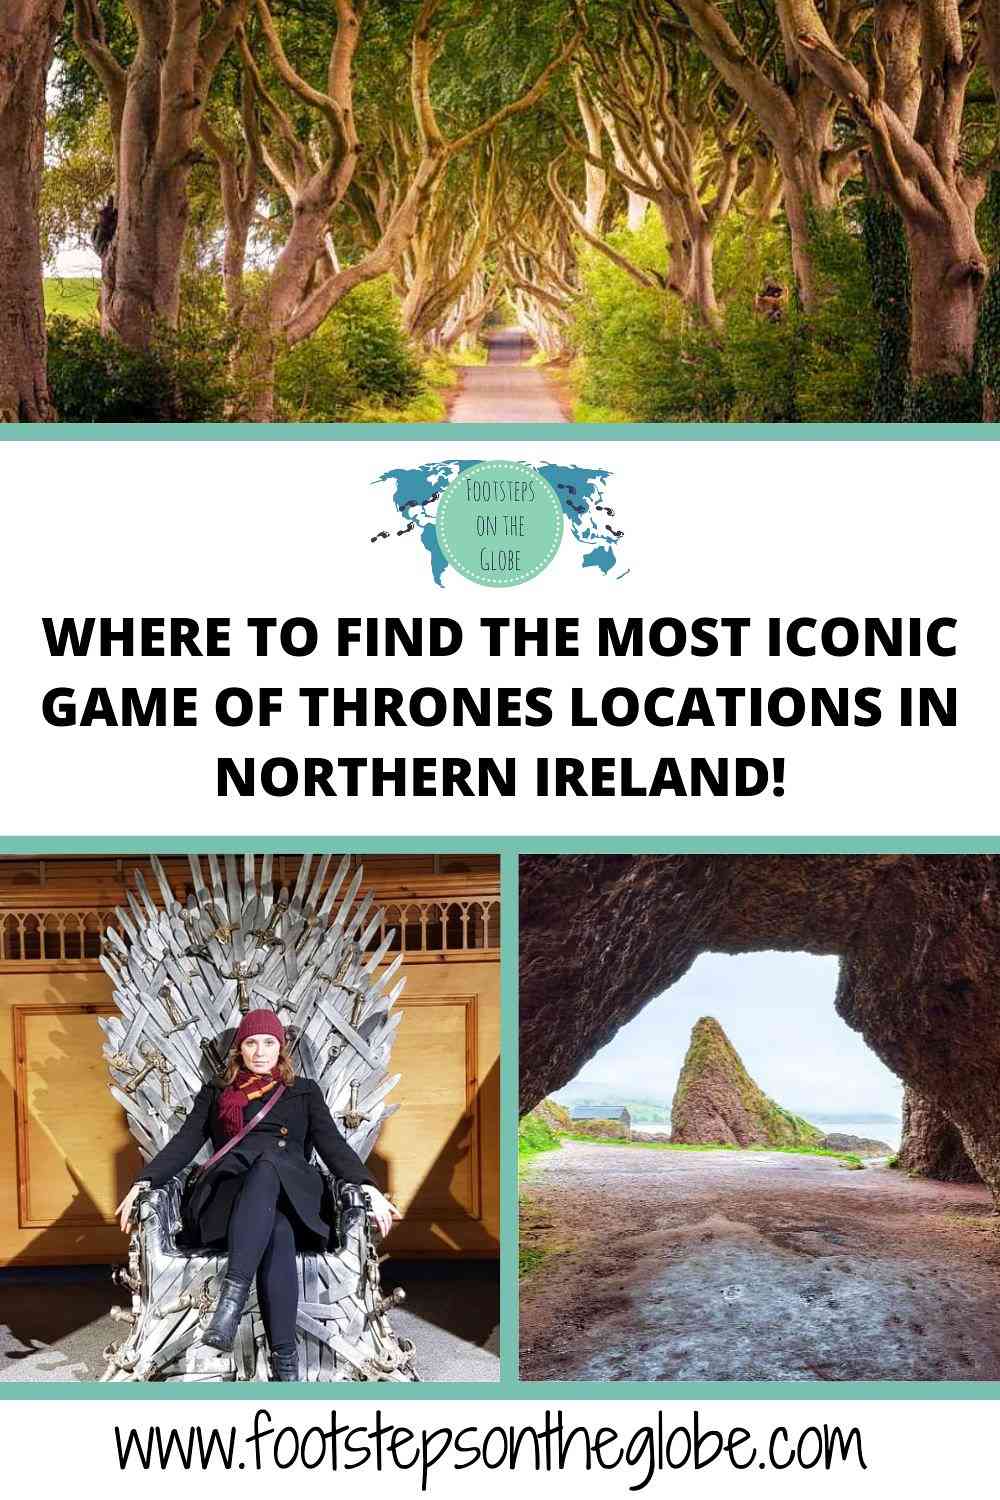 Images of Games of Thrones filming locations including the dark hedges, Cushendun Caves and the Iron Throne with the text: "Where to find the most epic Game of Thrones locations in Northern Ireland!" Pinterest image